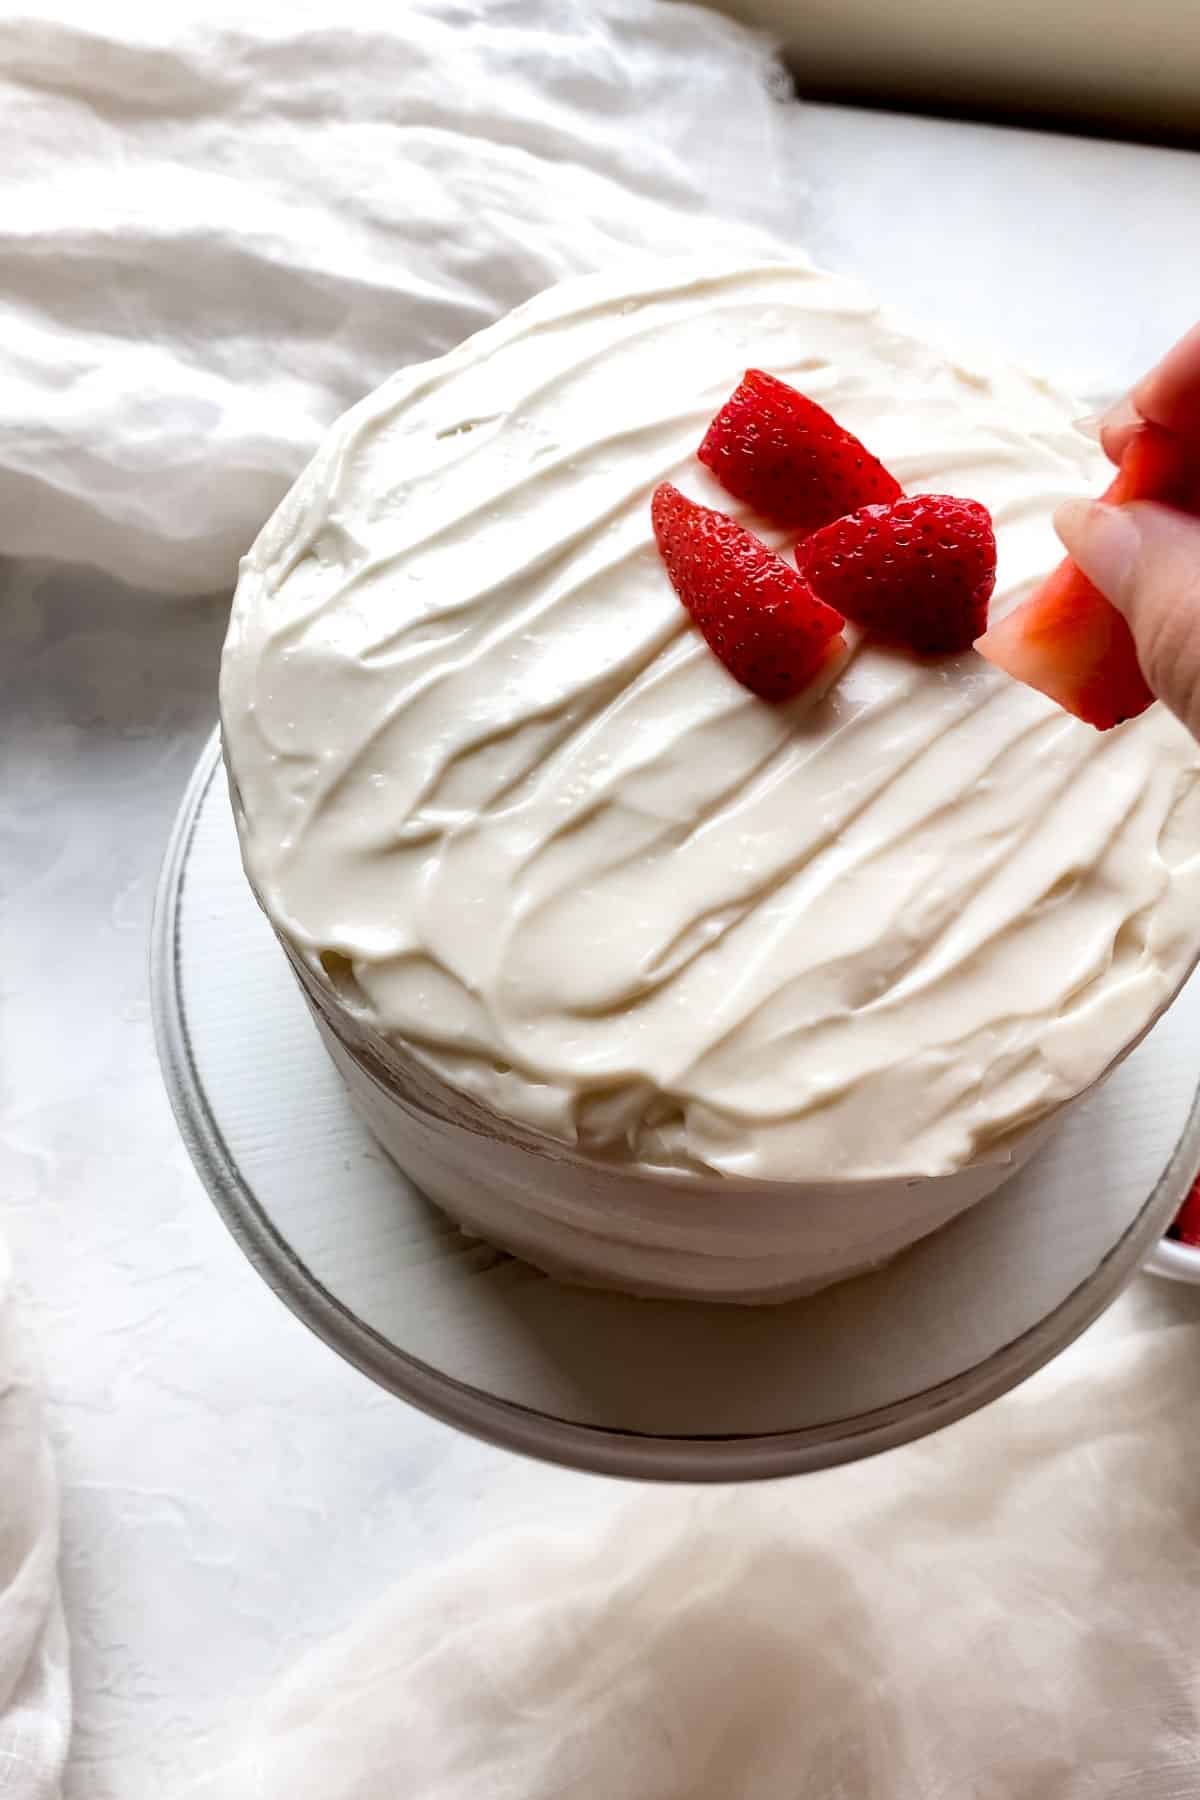 placing strawberries onto a frosted cake